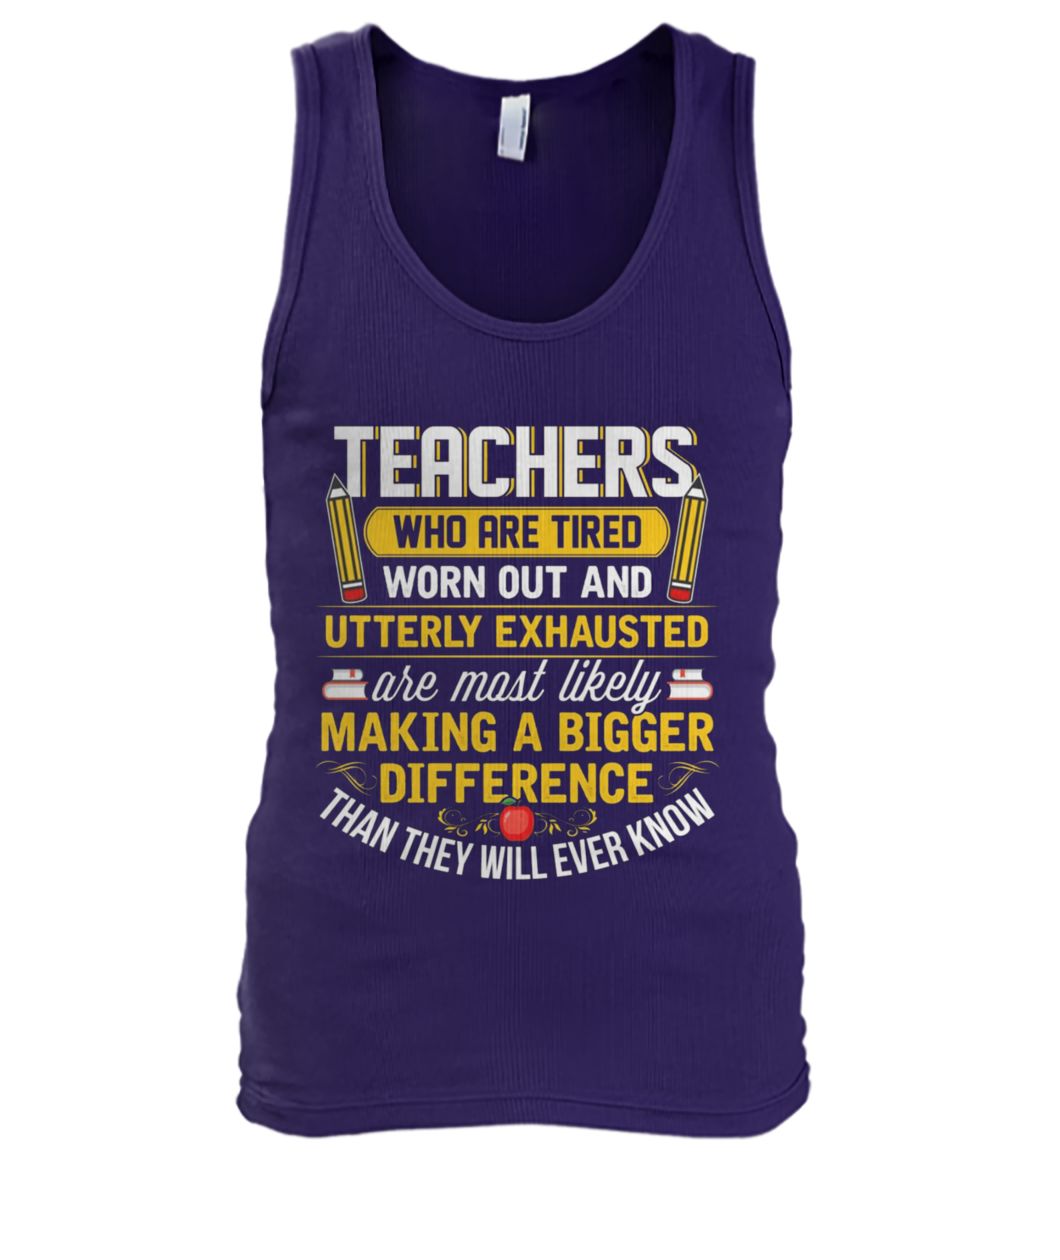 Teacher who are tired worn out and utterly exhausted men's tank top